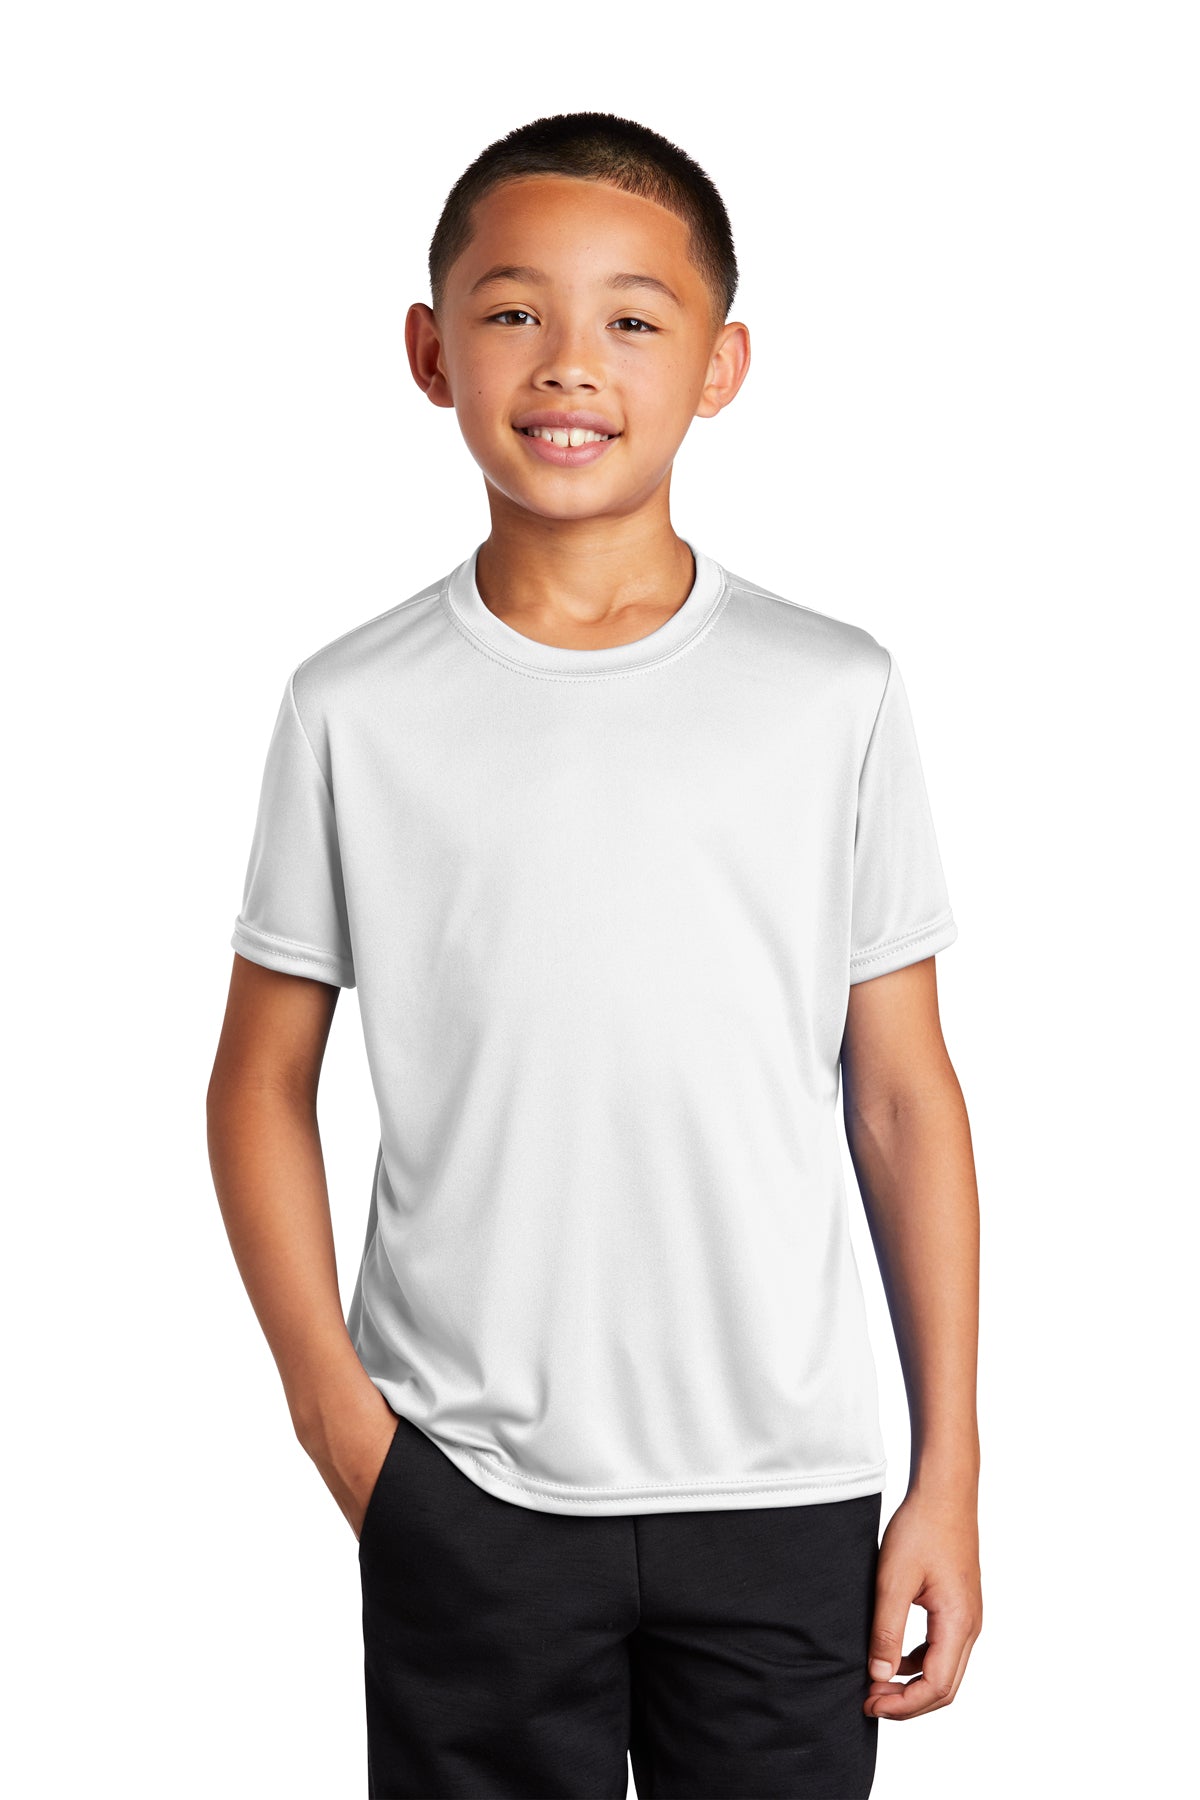 Port & Company Youth Performance Tee - XL White